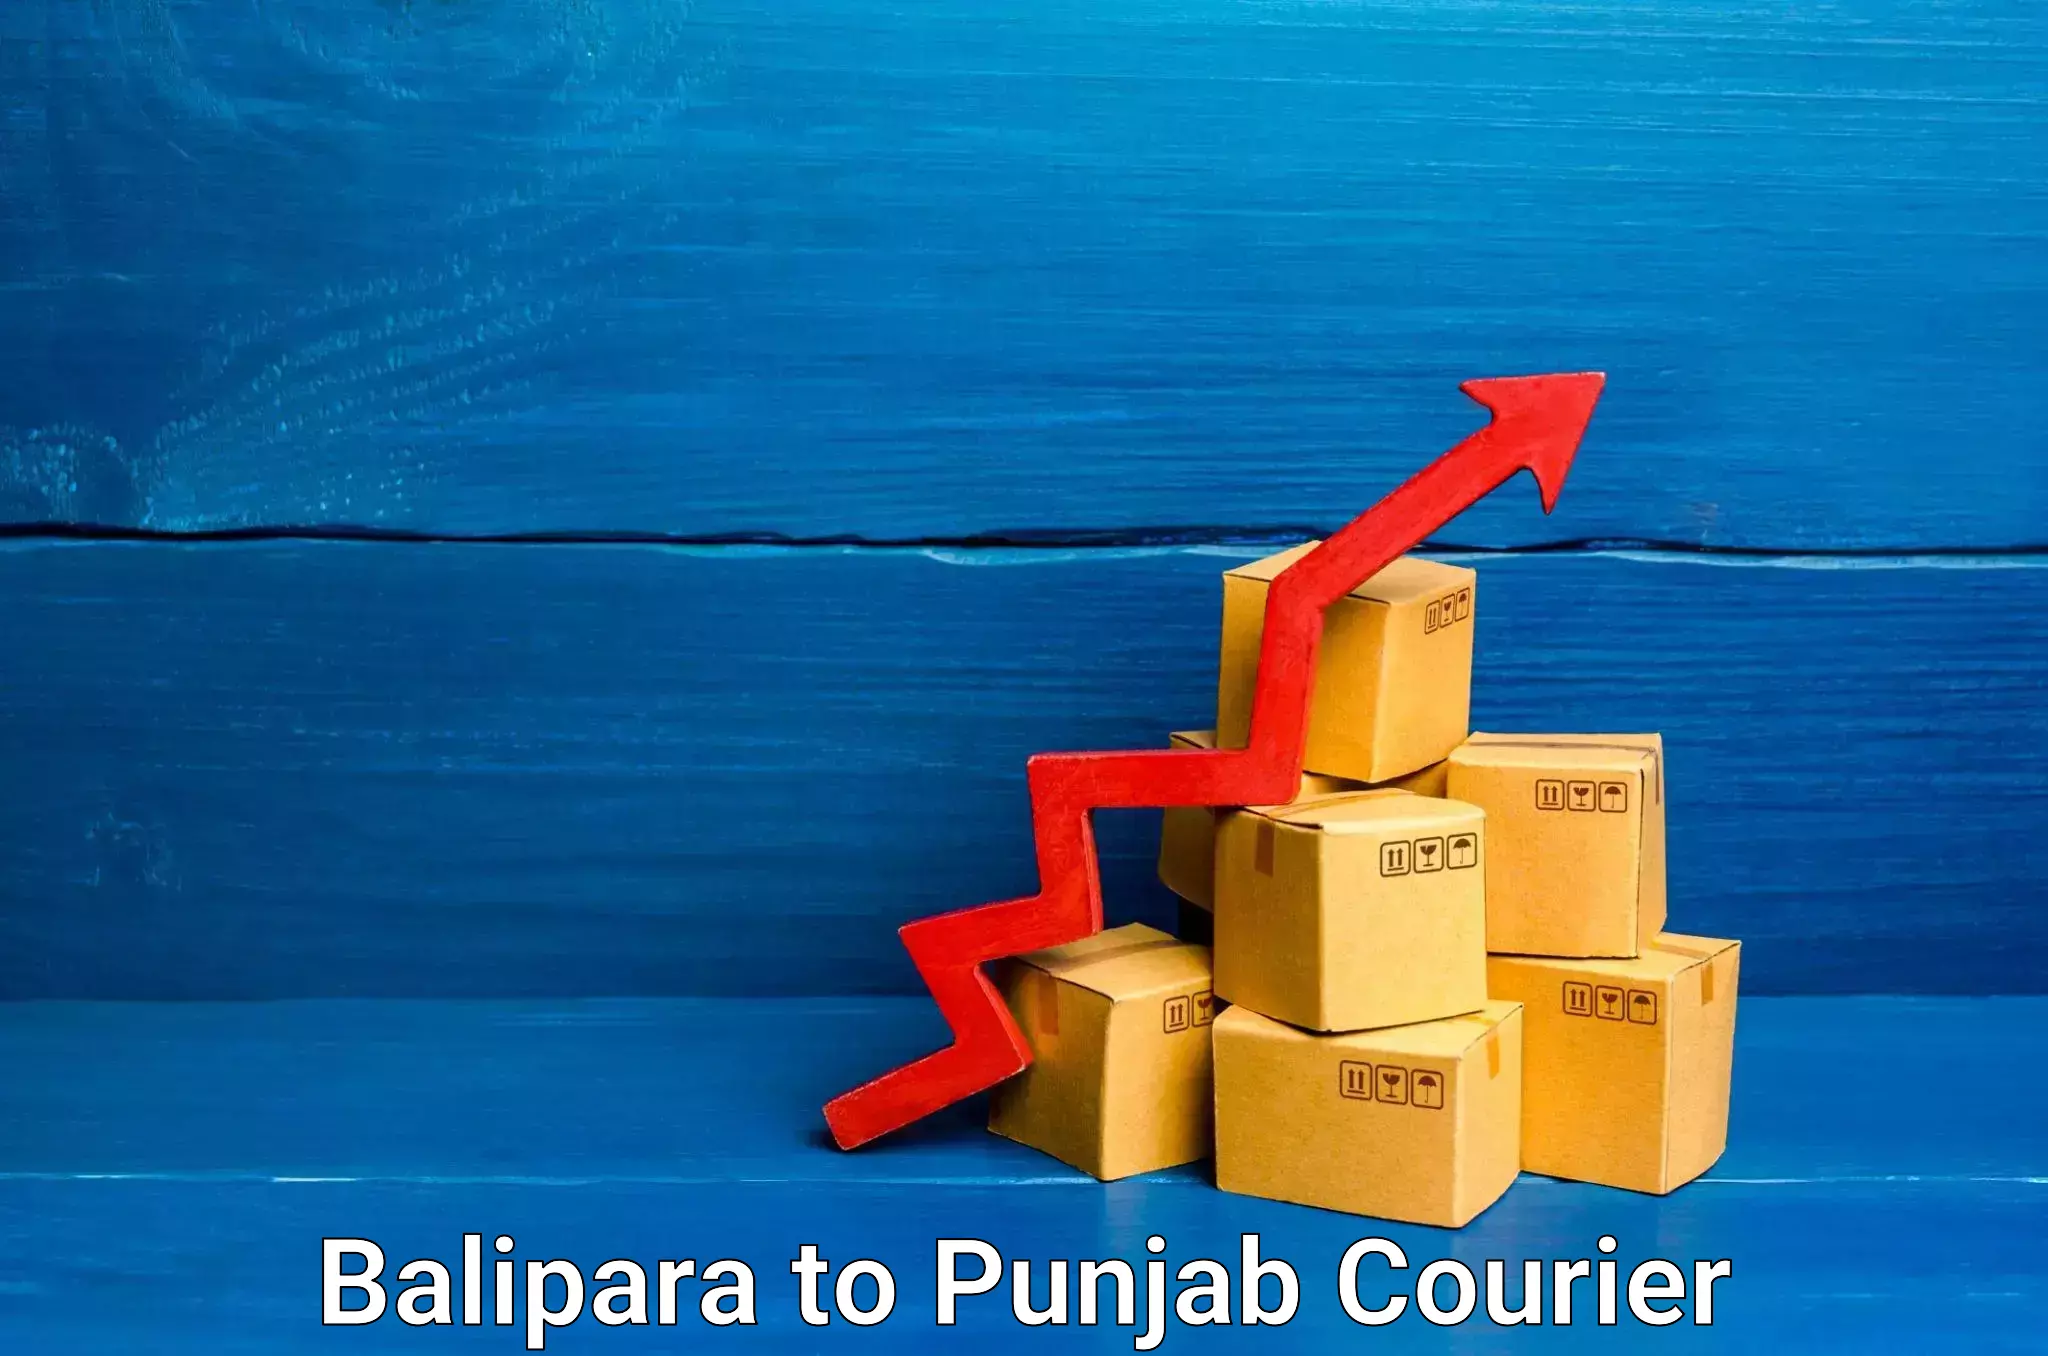 Next-day delivery options Balipara to Jalandhar